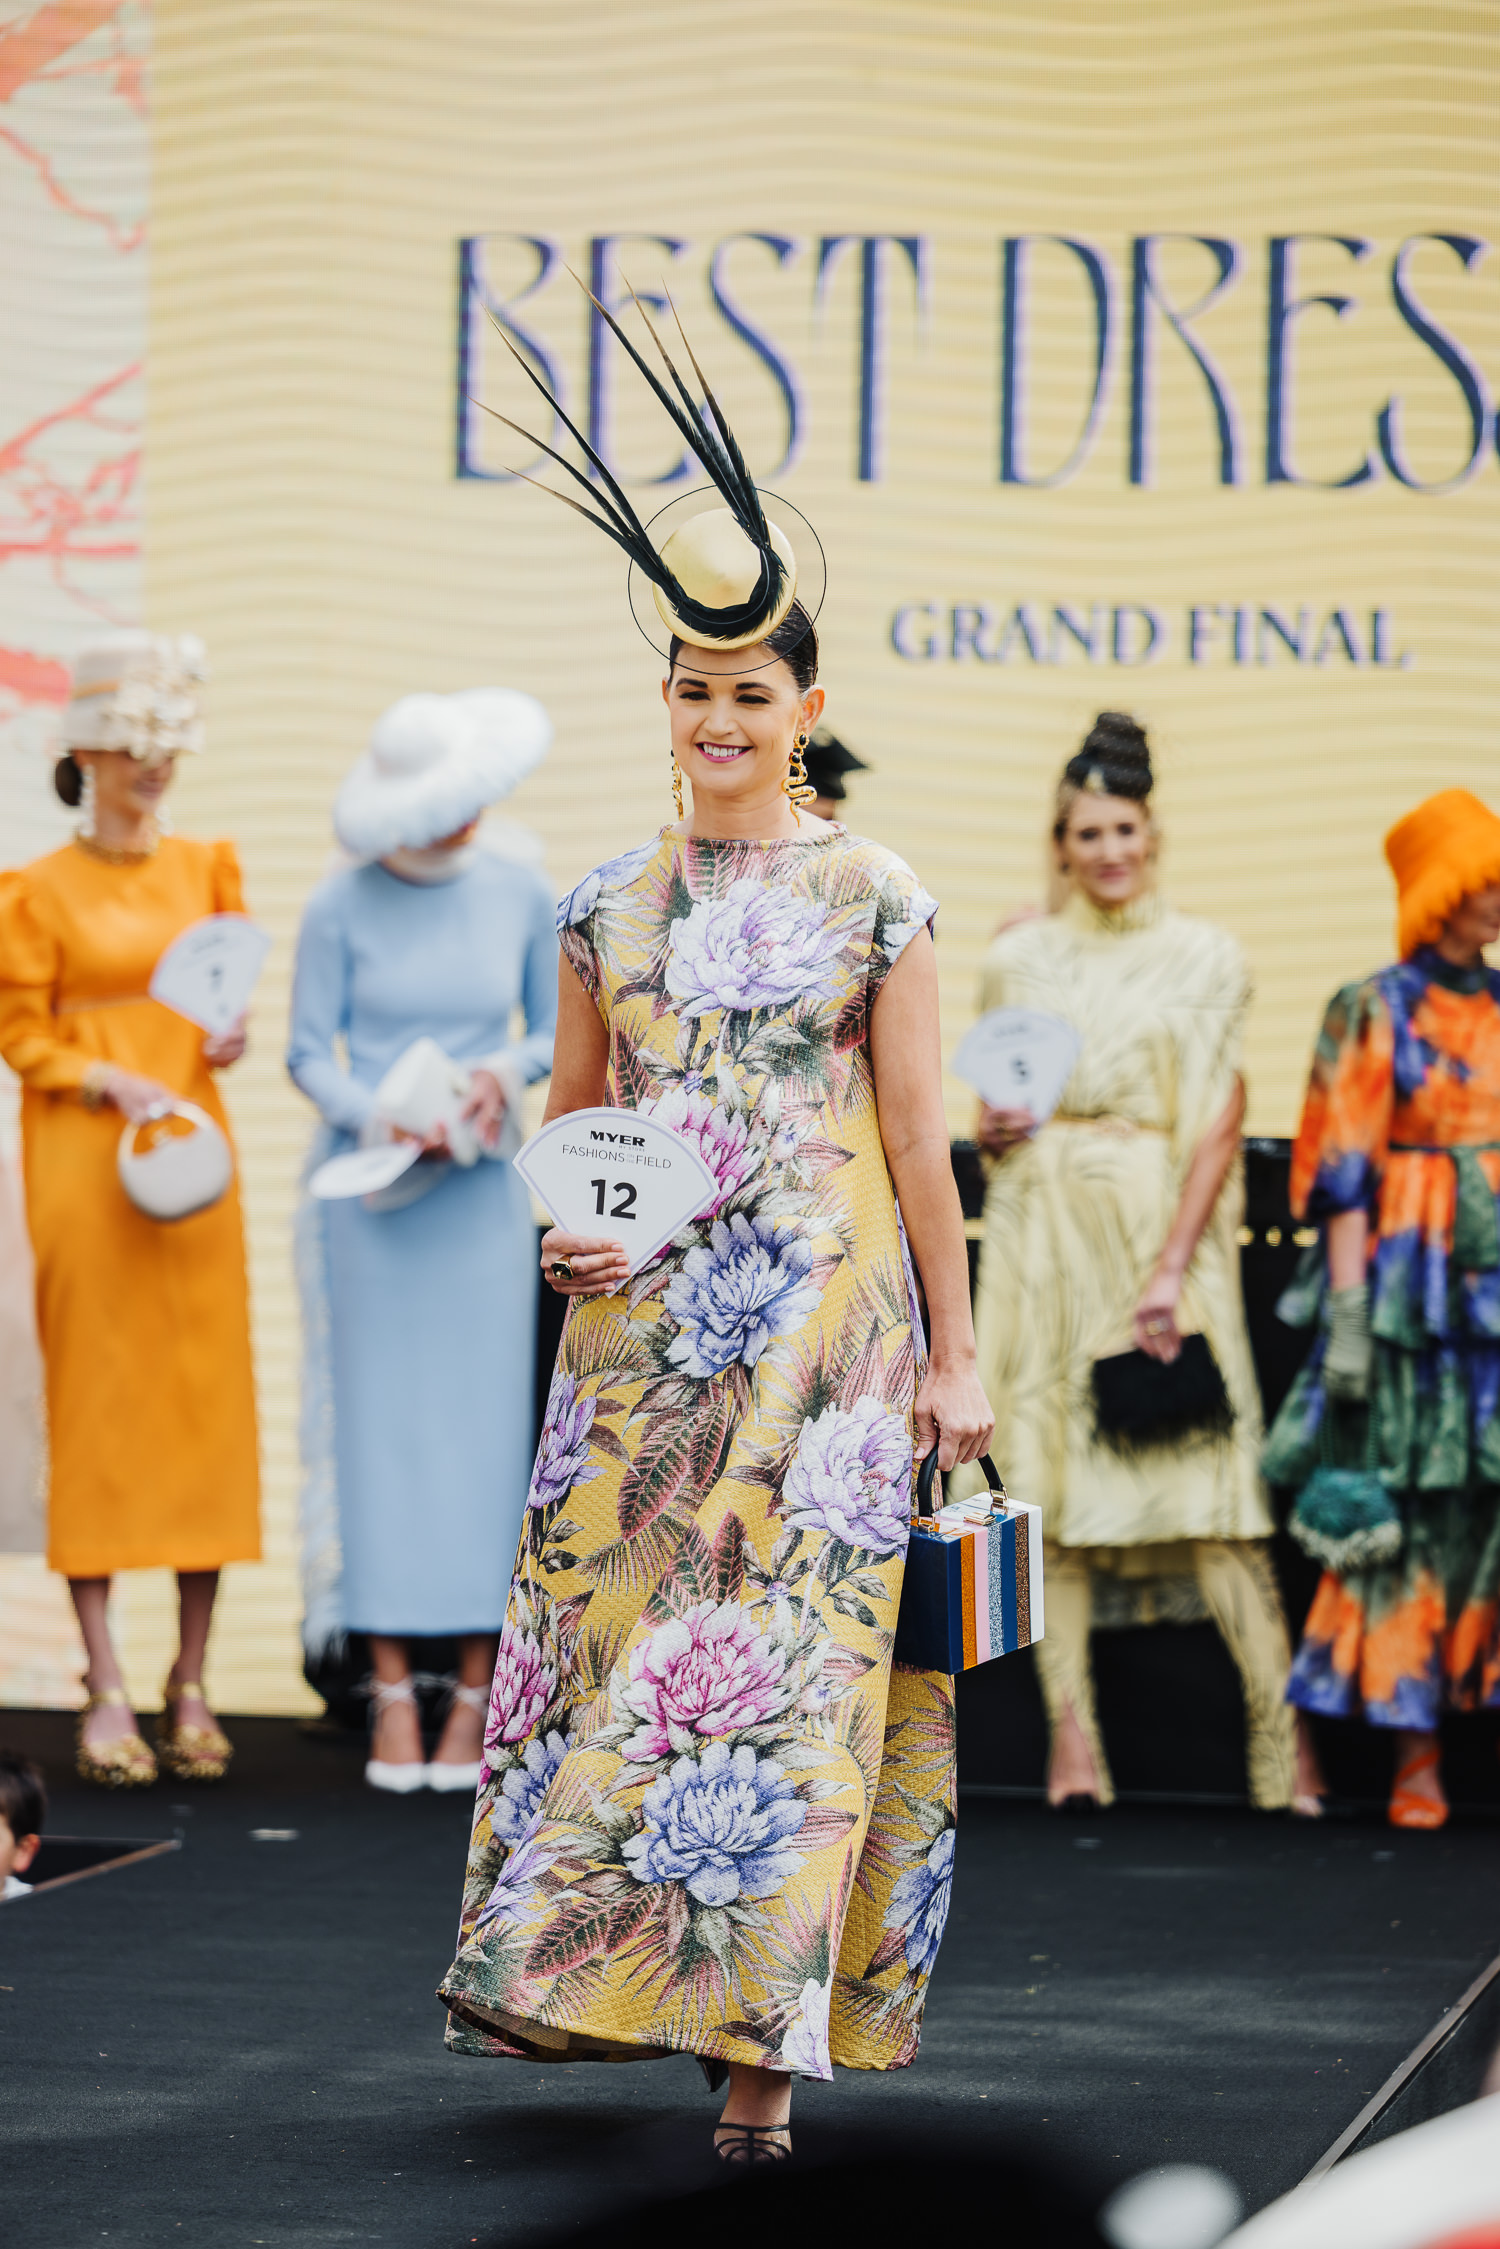 Bernadette May - Winner Best Dressed on stage at the Melbourne Cup